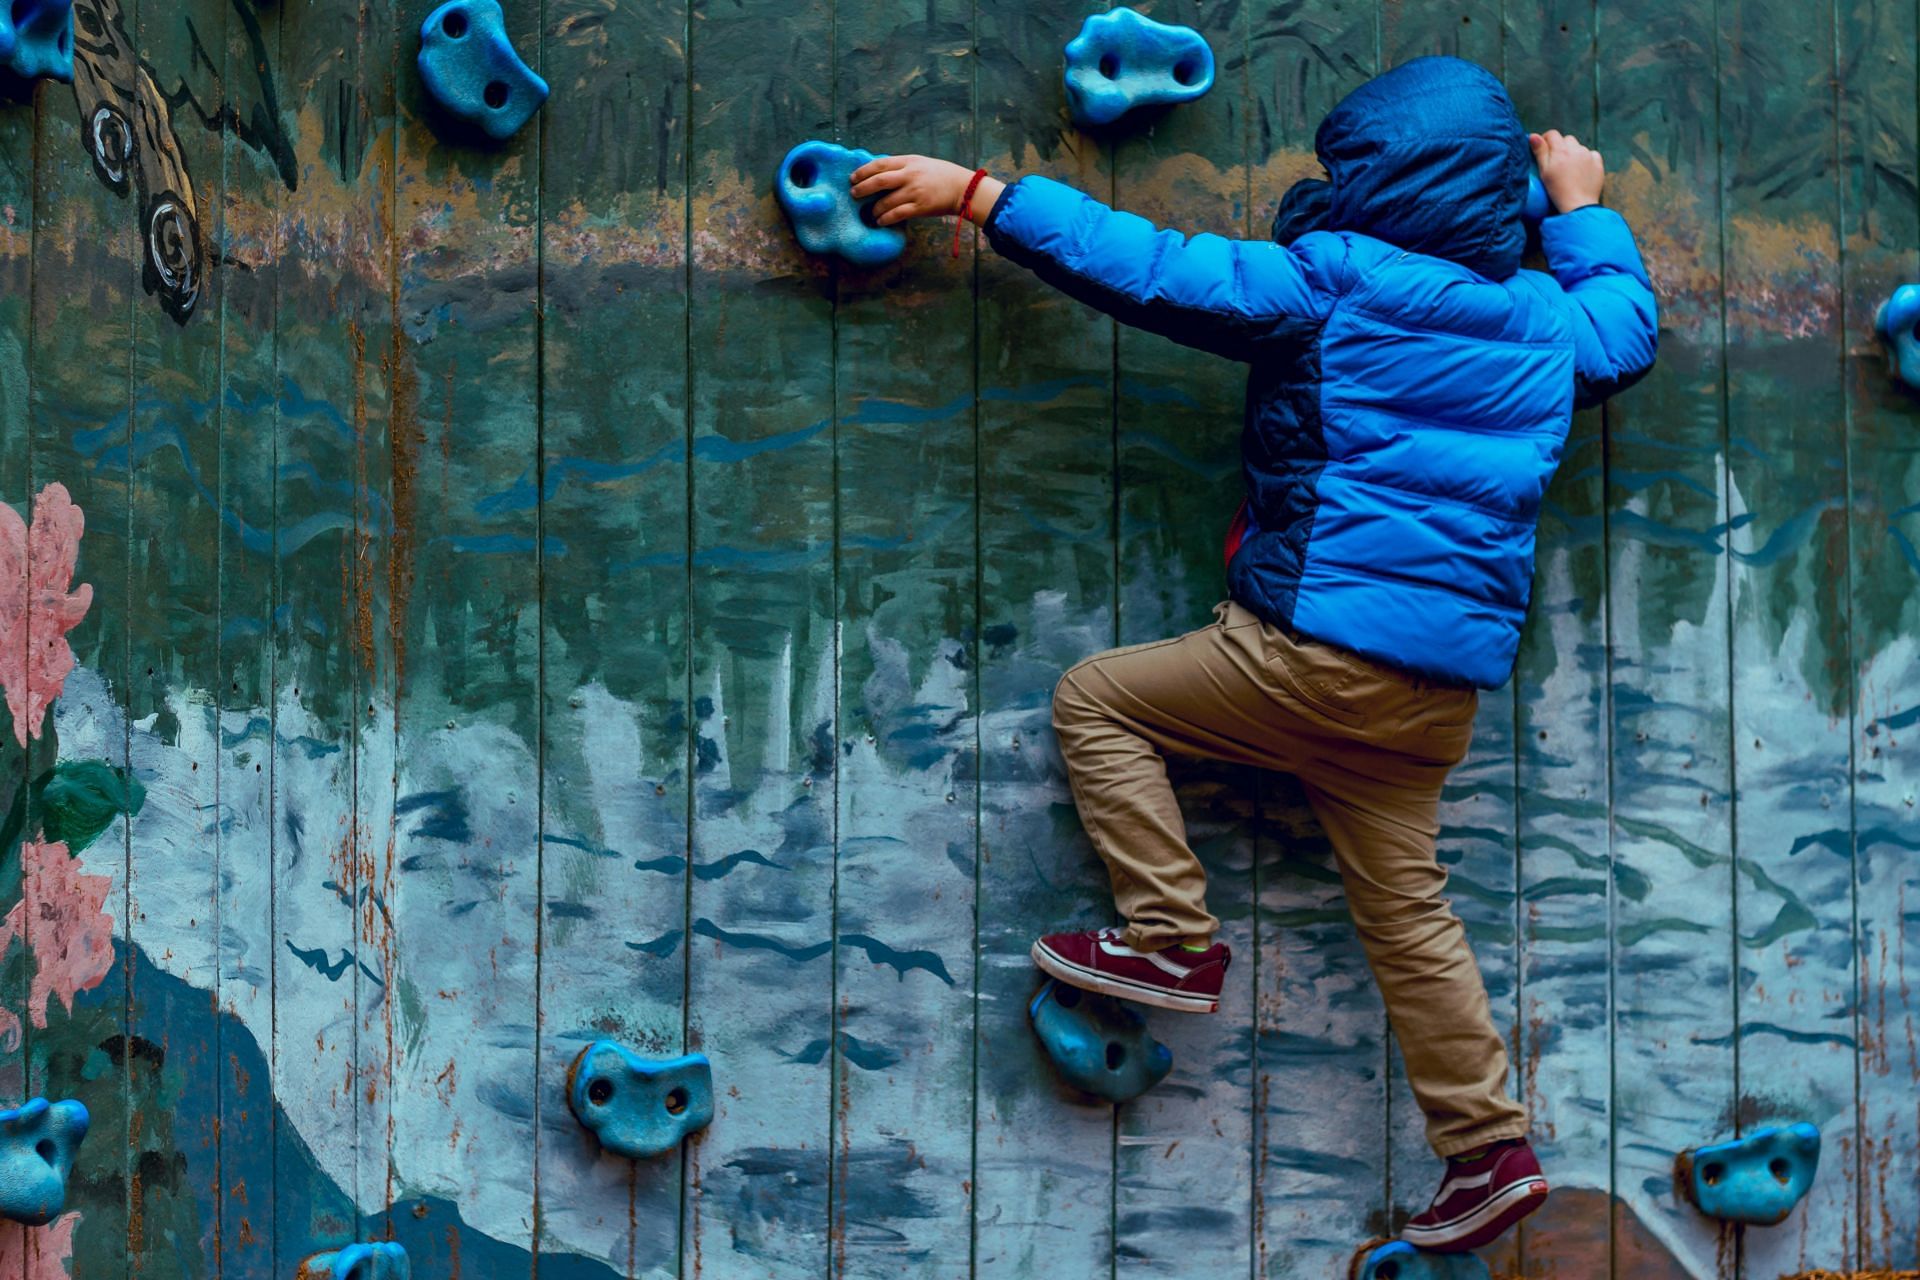 Importance of bouldering (image sourced via Pexels / Photo by ameruverse)